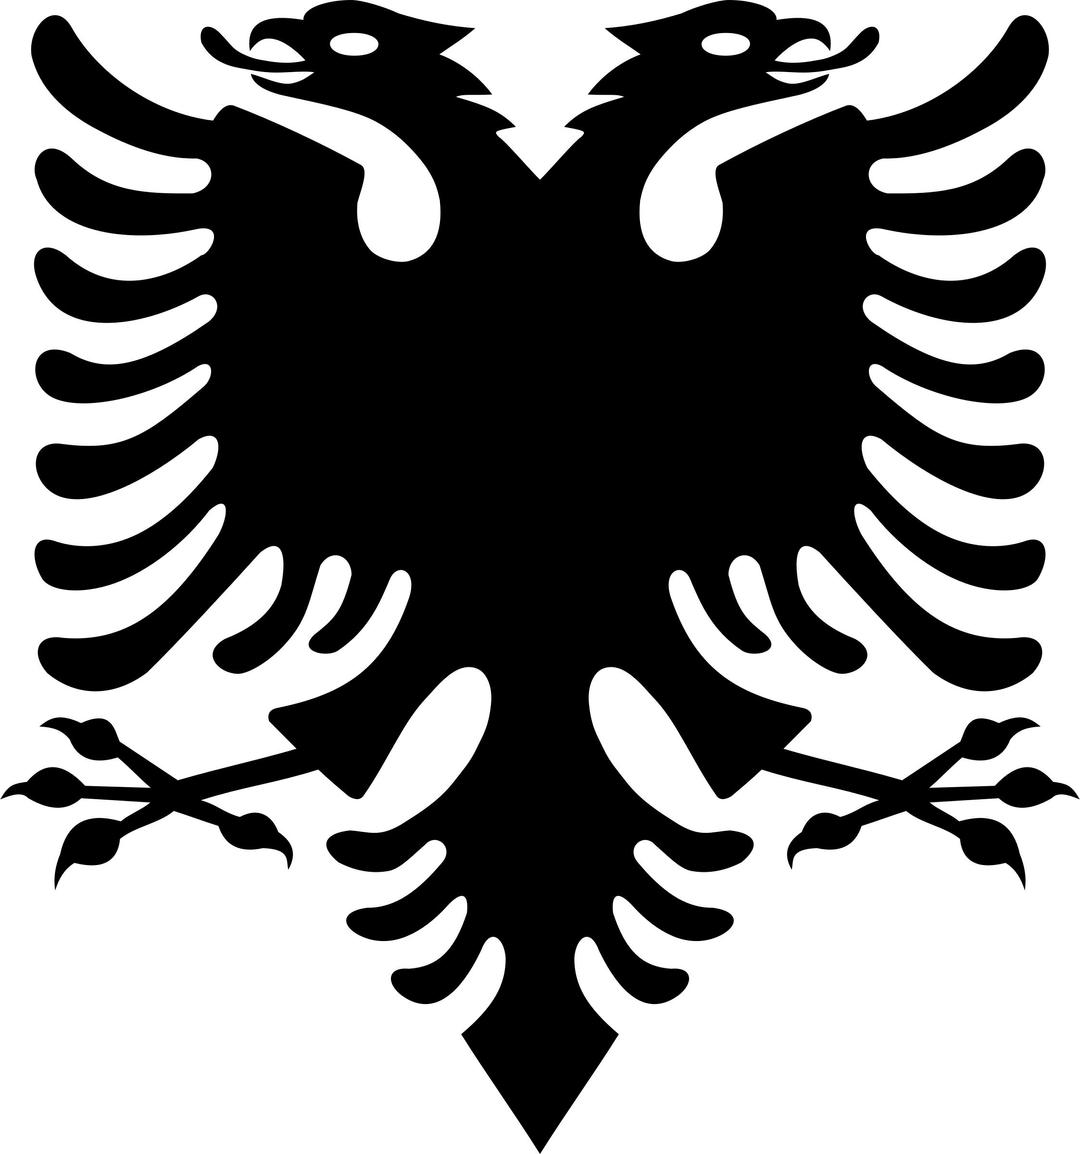 Double Headed Eagle Silhouette png transparent